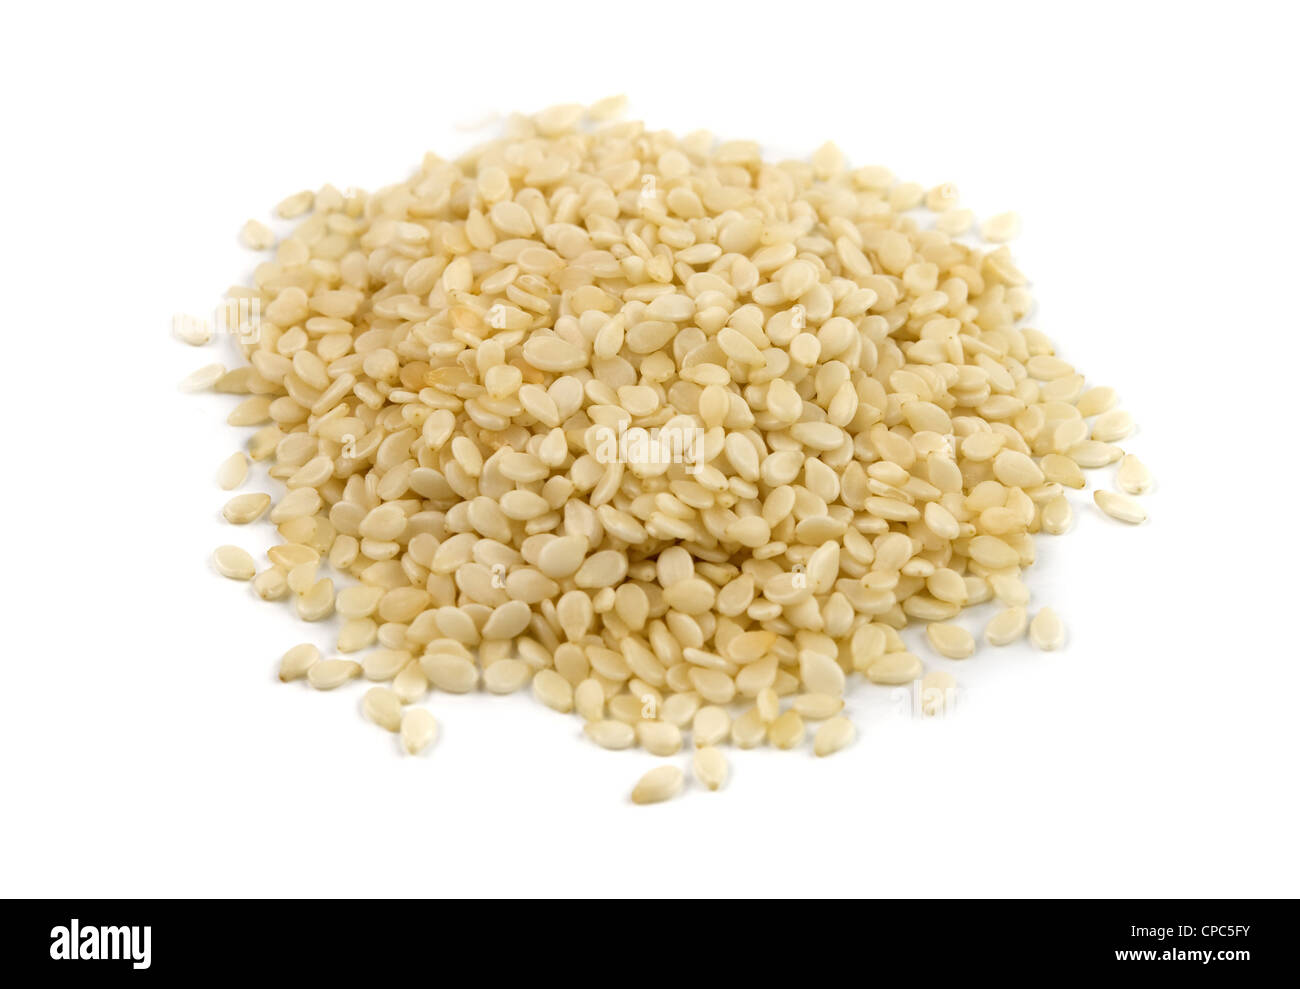 small heap of sesame seeds Stock Photo